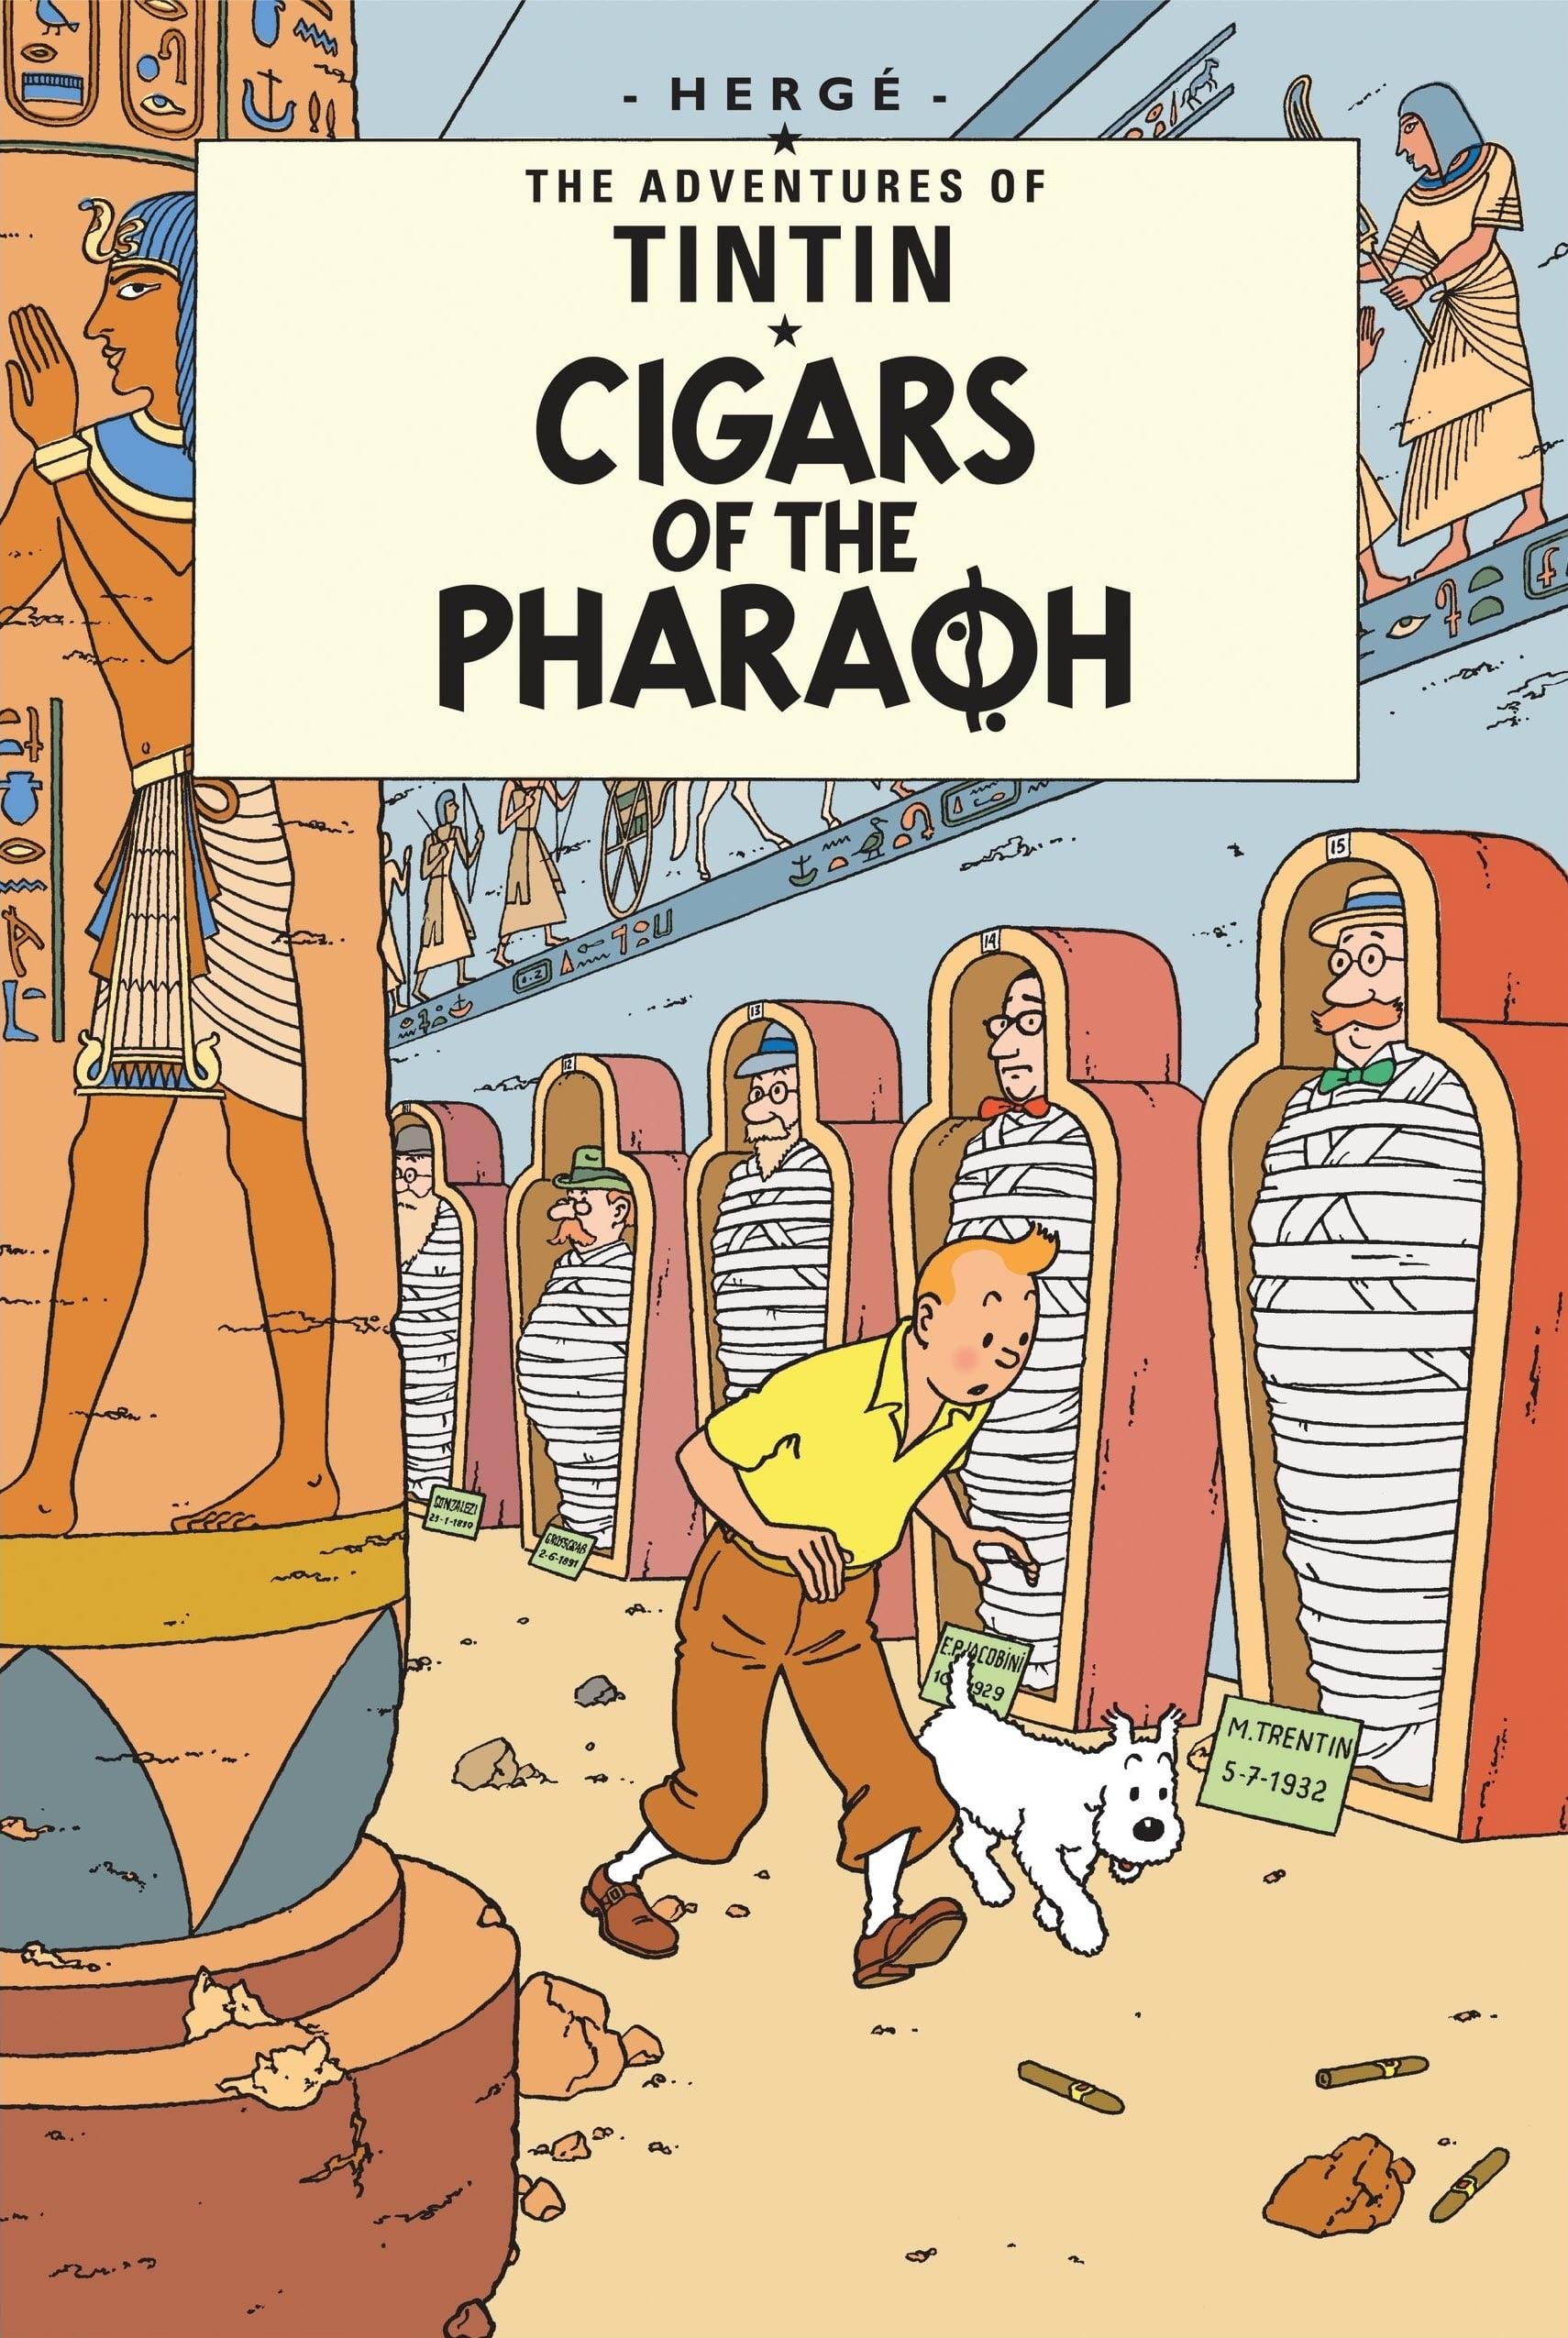 Cigars of the Pharaoh poster